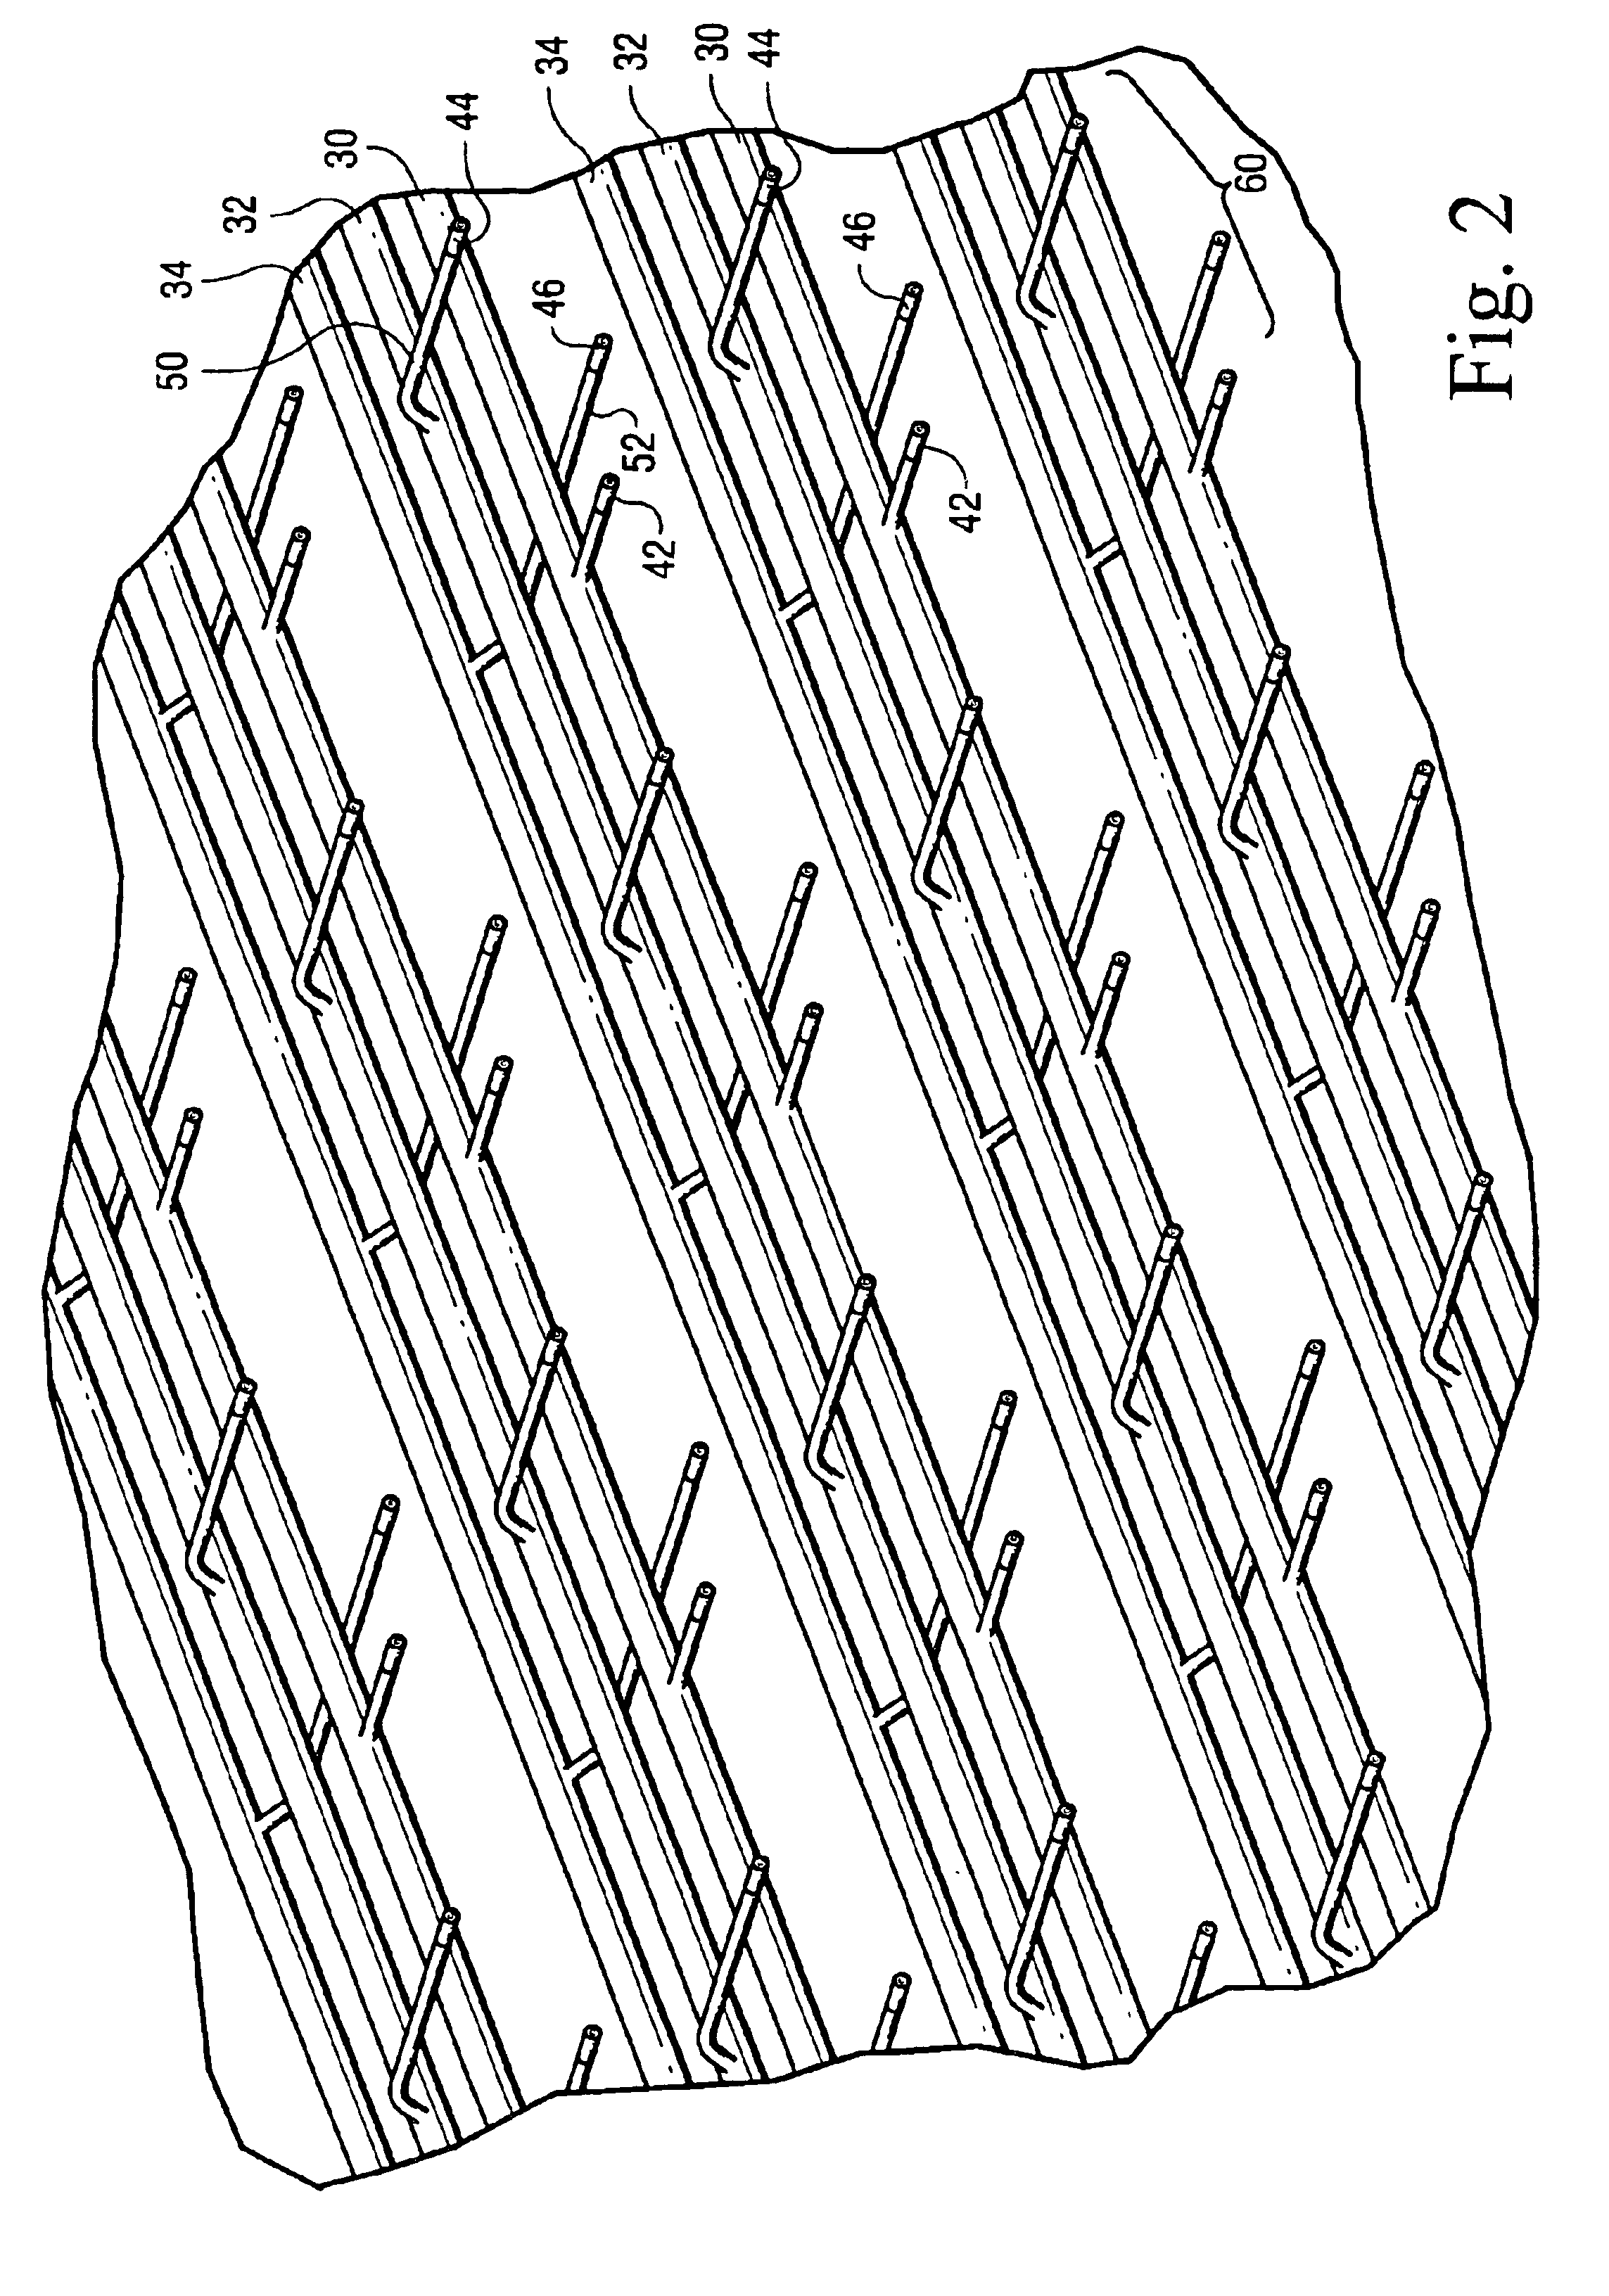 Spray nozzle grid configuration for gas turbine inlet misting system